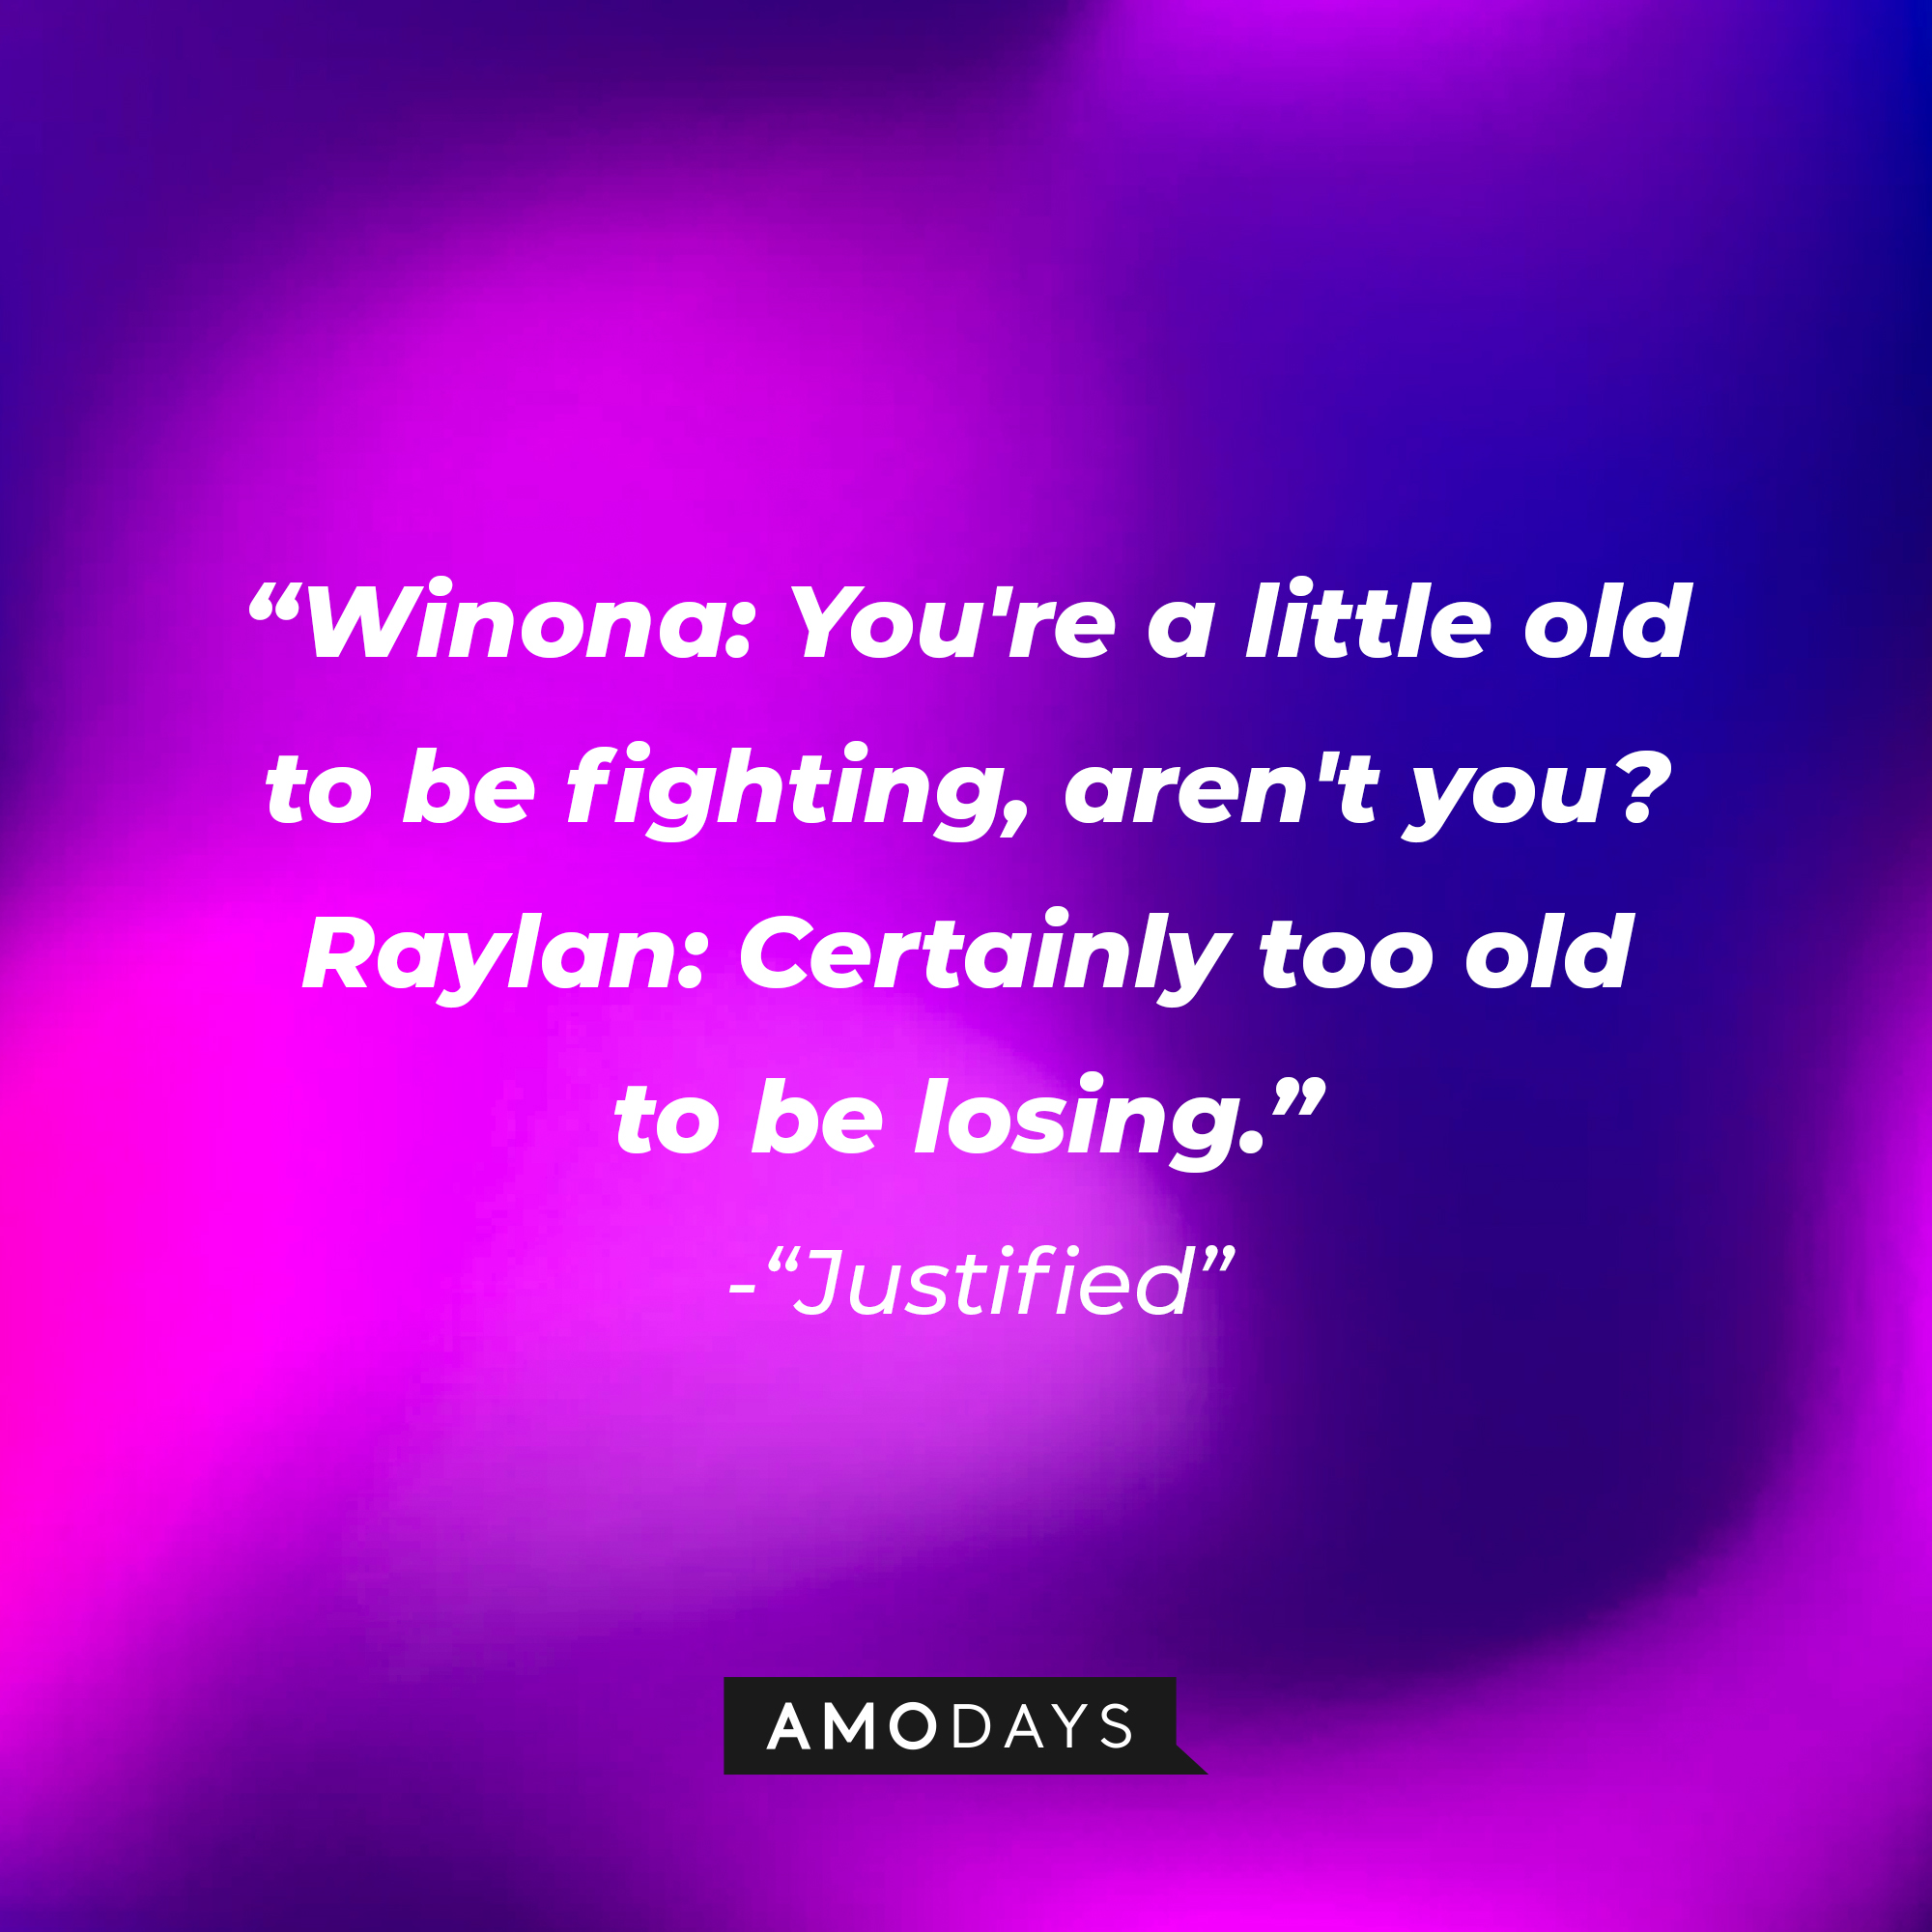 Quote from “Justified”: “Winona: You're a little old to be fighting, aren't you? Raylan: Certainly too old to be losing.” | Source: AmoDays